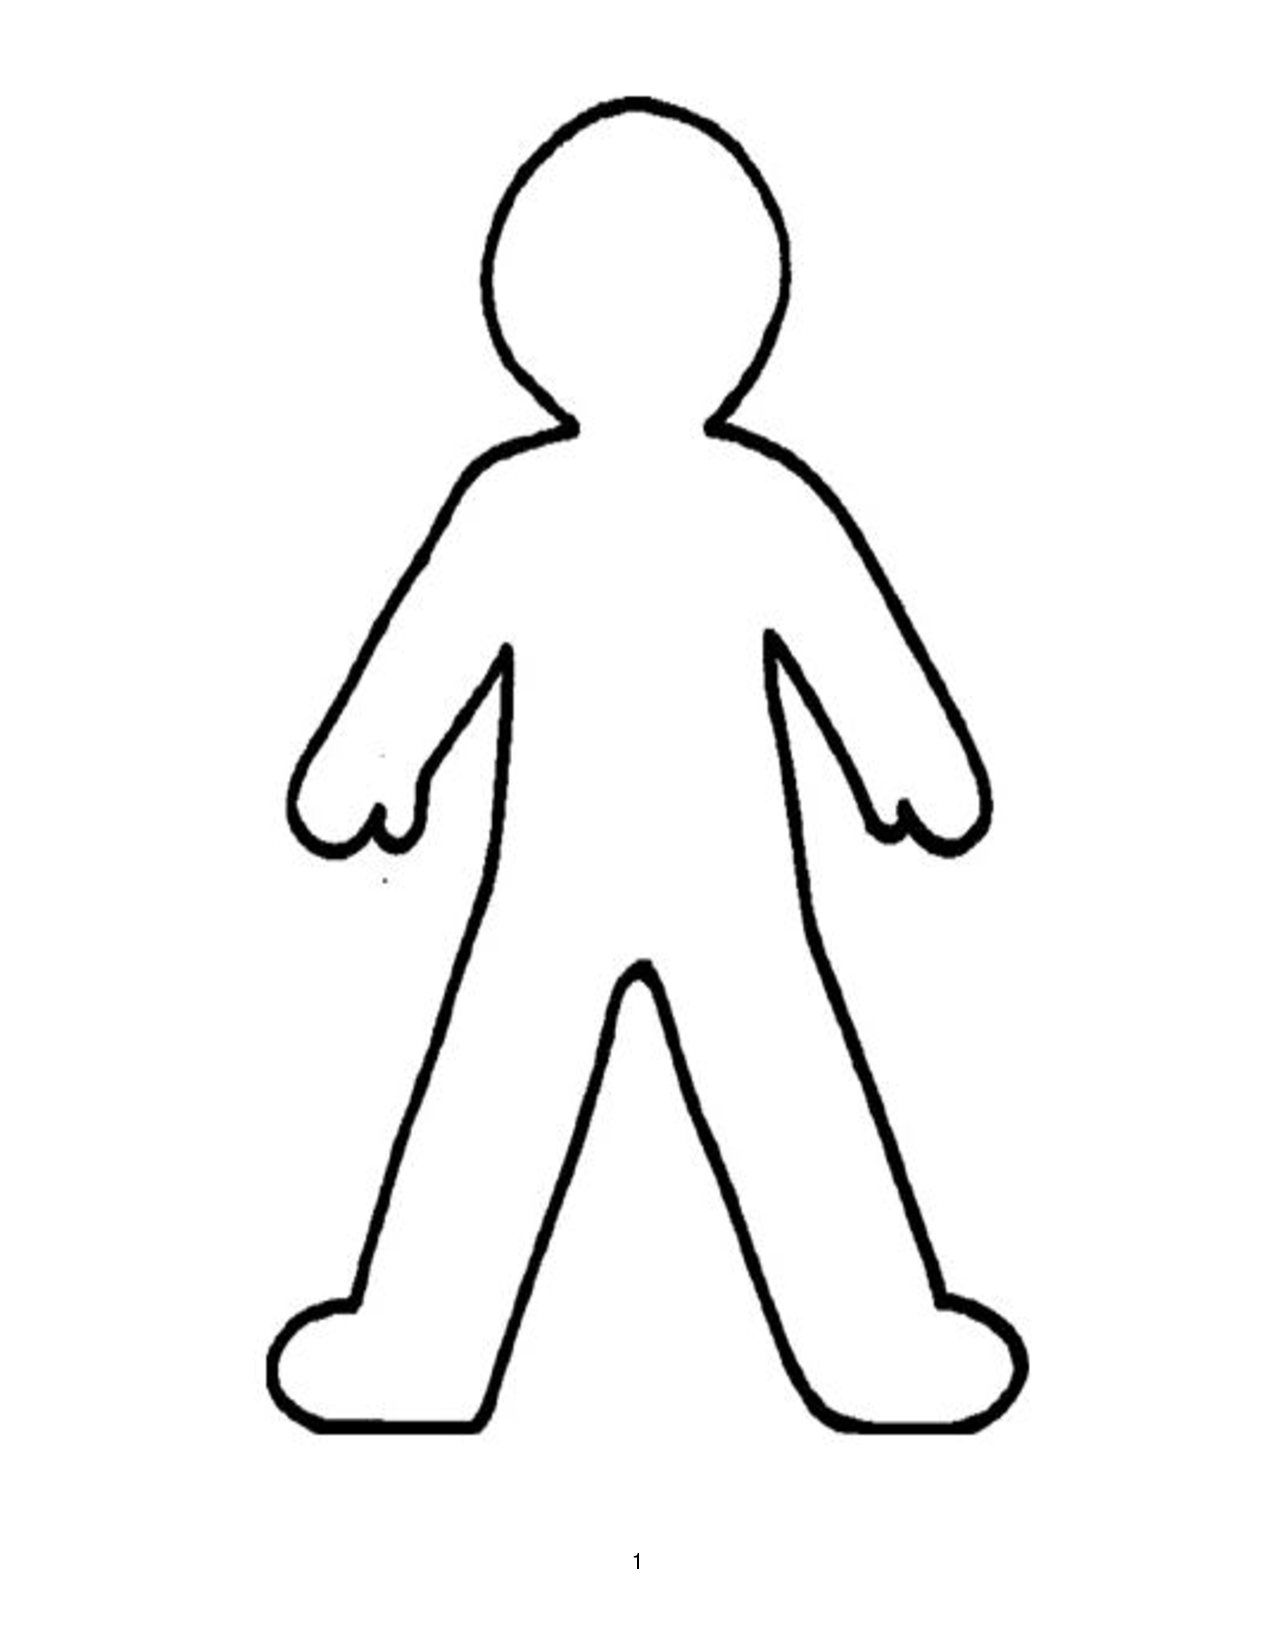 Doll outline template.